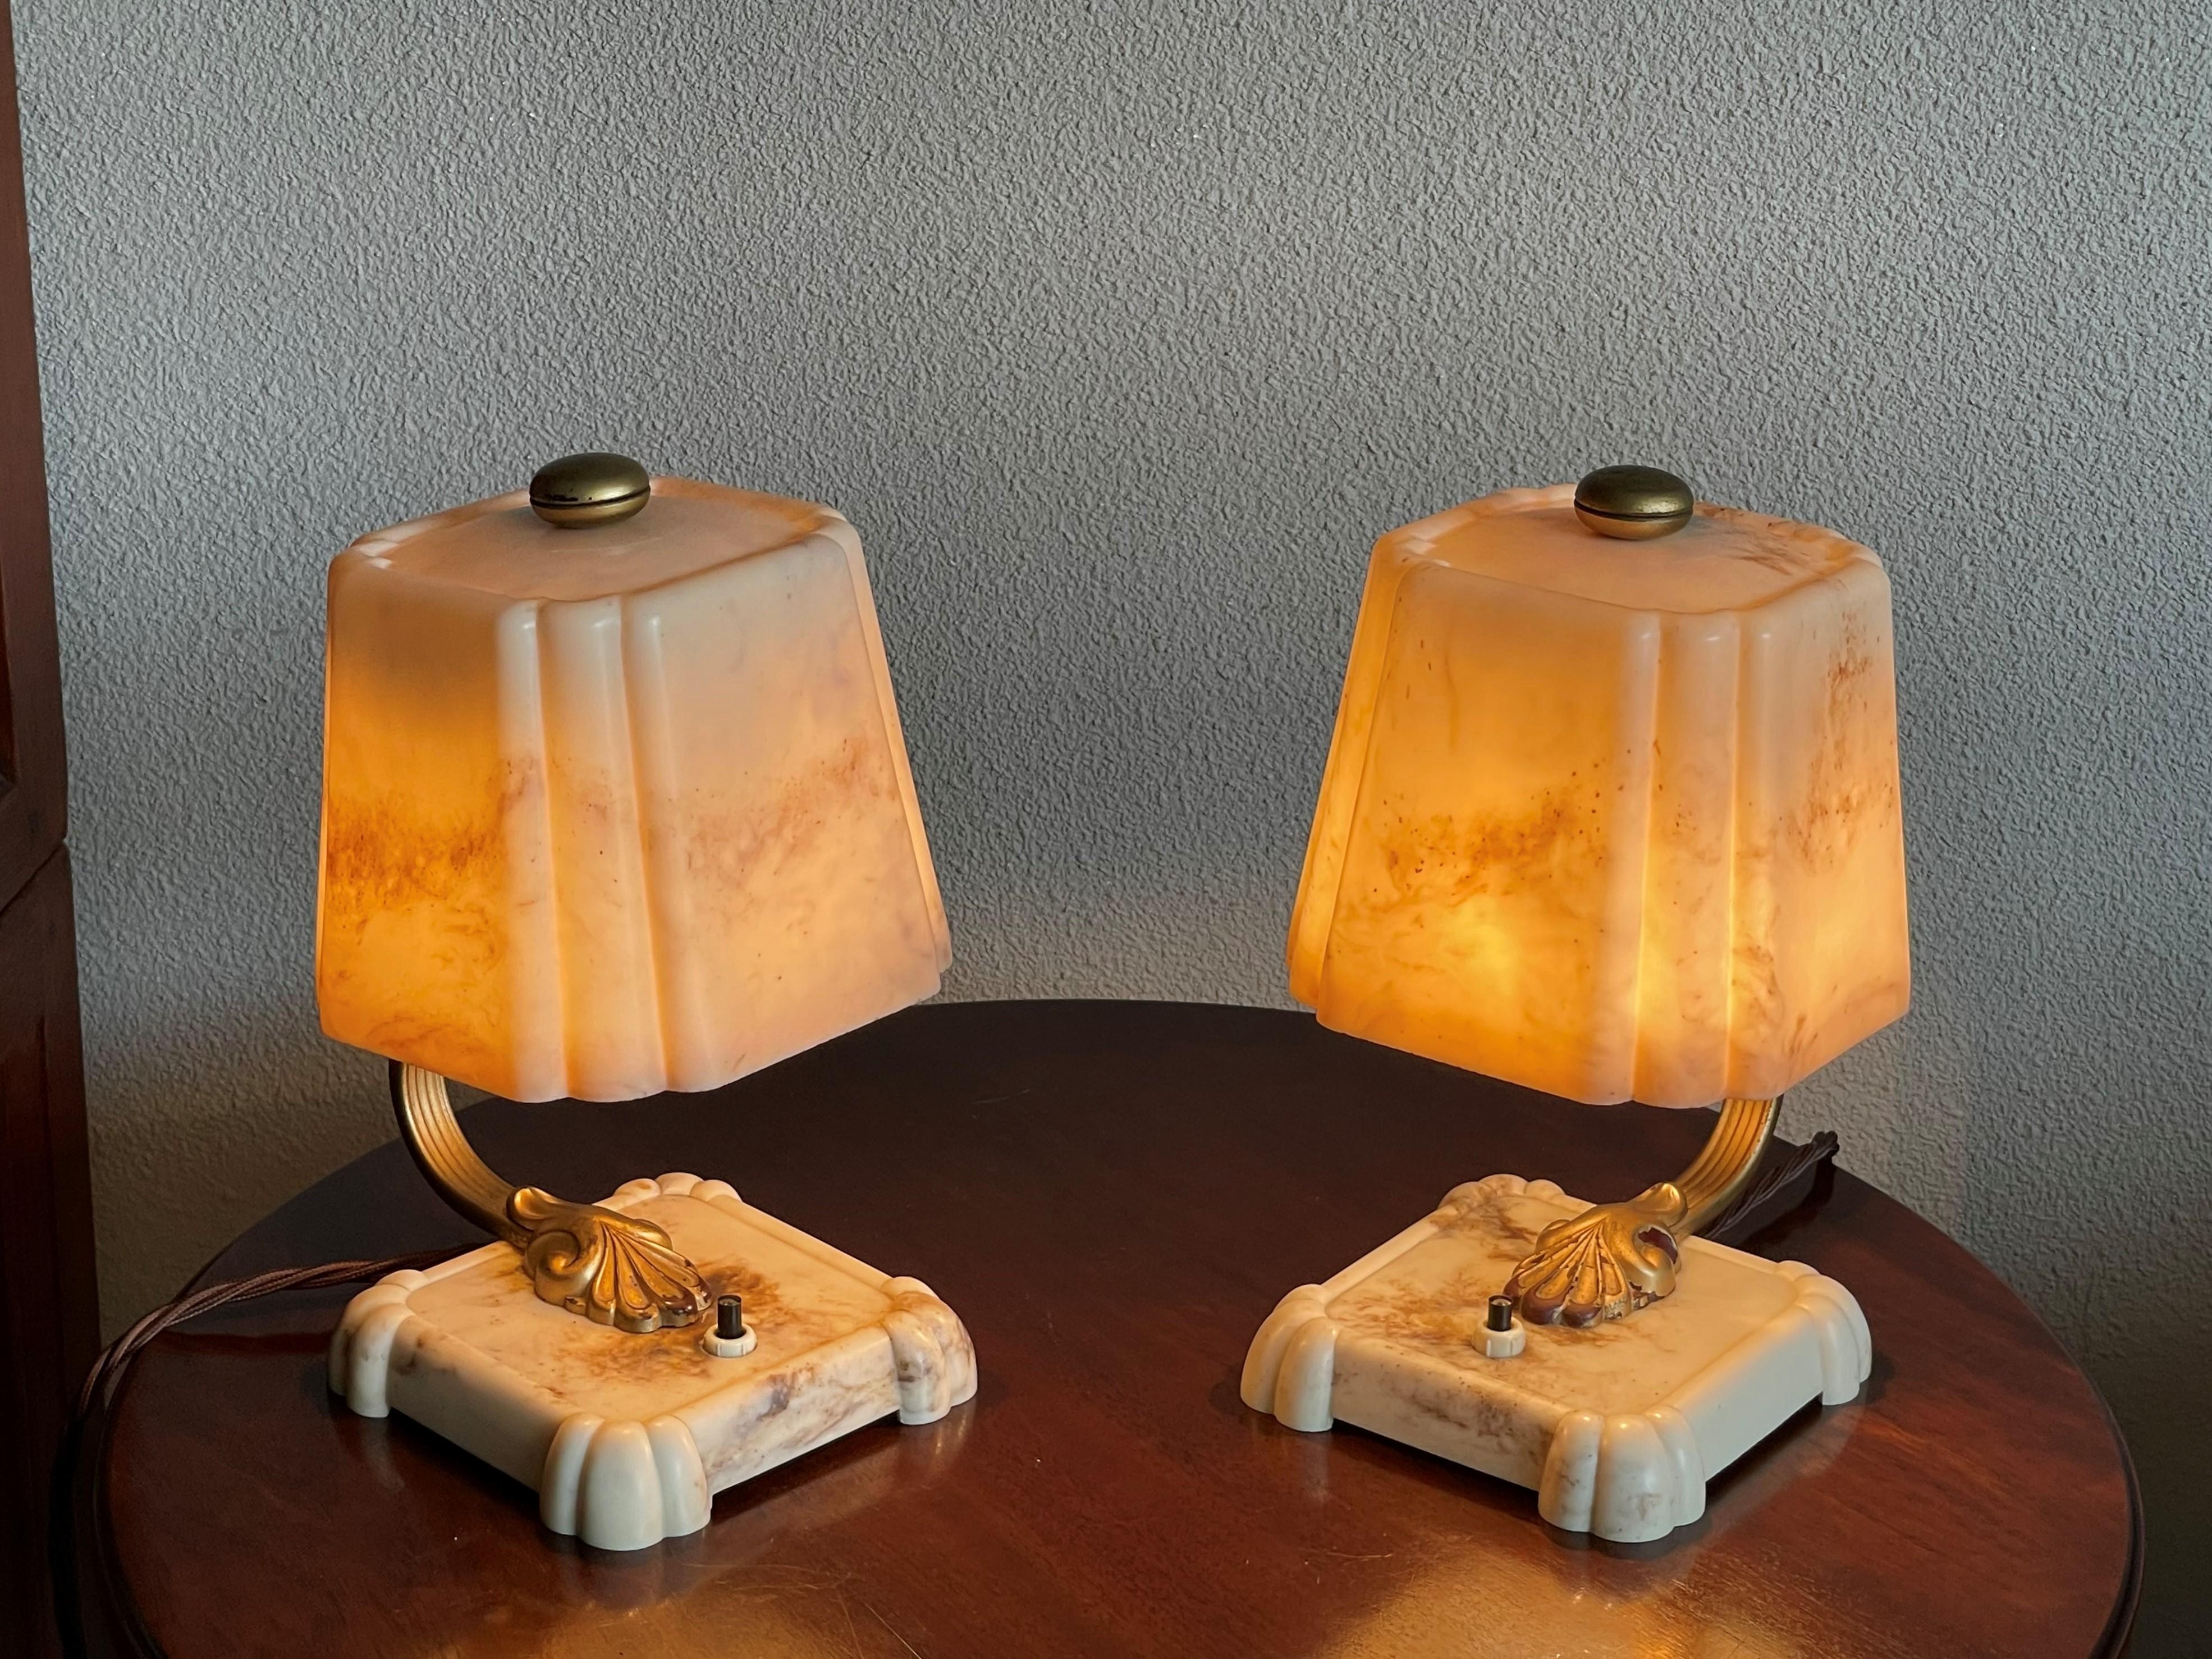 Very rare and great looking pair of real Bakelite lamps.

With early twentieth century lighting being one of our specialties, we know how hard it is to find pairs of Art Deco era table lamps. To have found a matching pair of Bakelite ones (!) in the